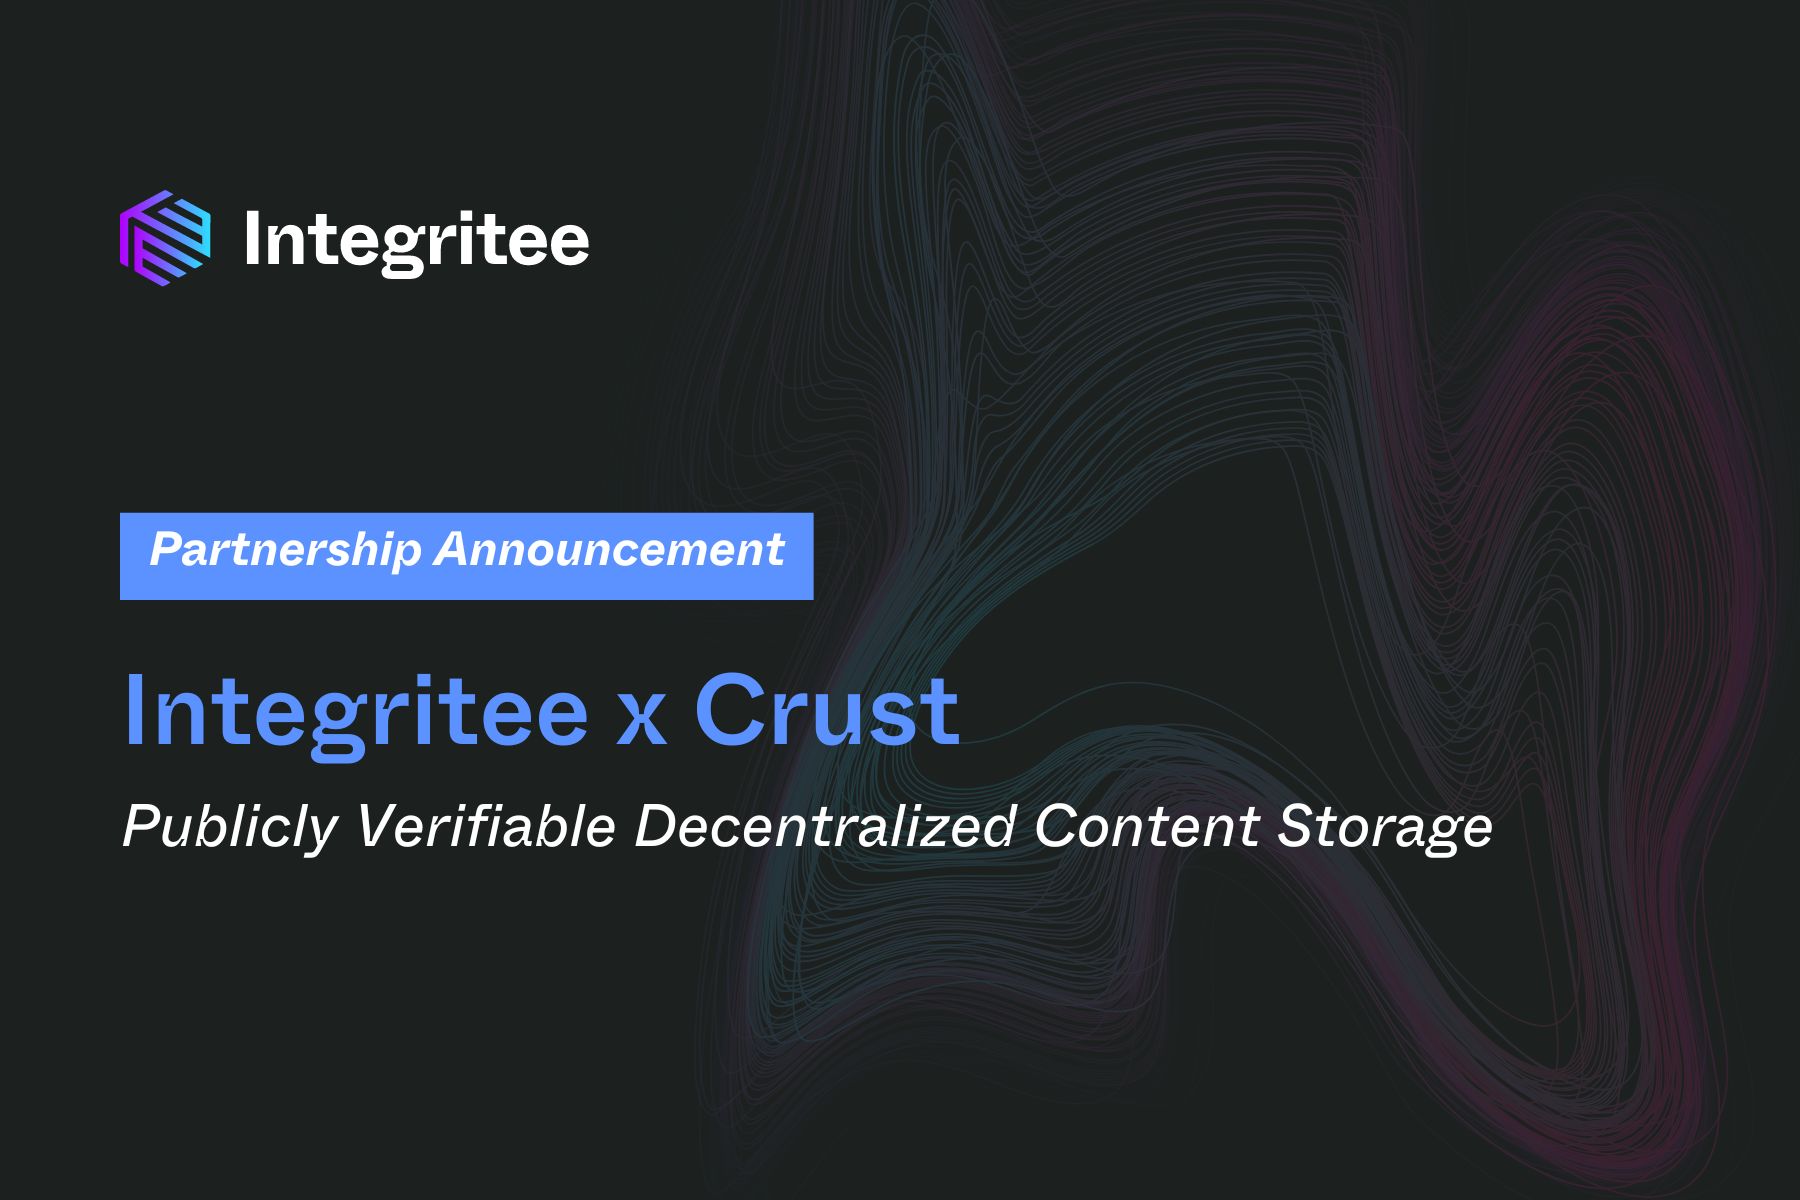 Integritee & Crust Team Up for Publicly Verifiable Decentralized Content Storage